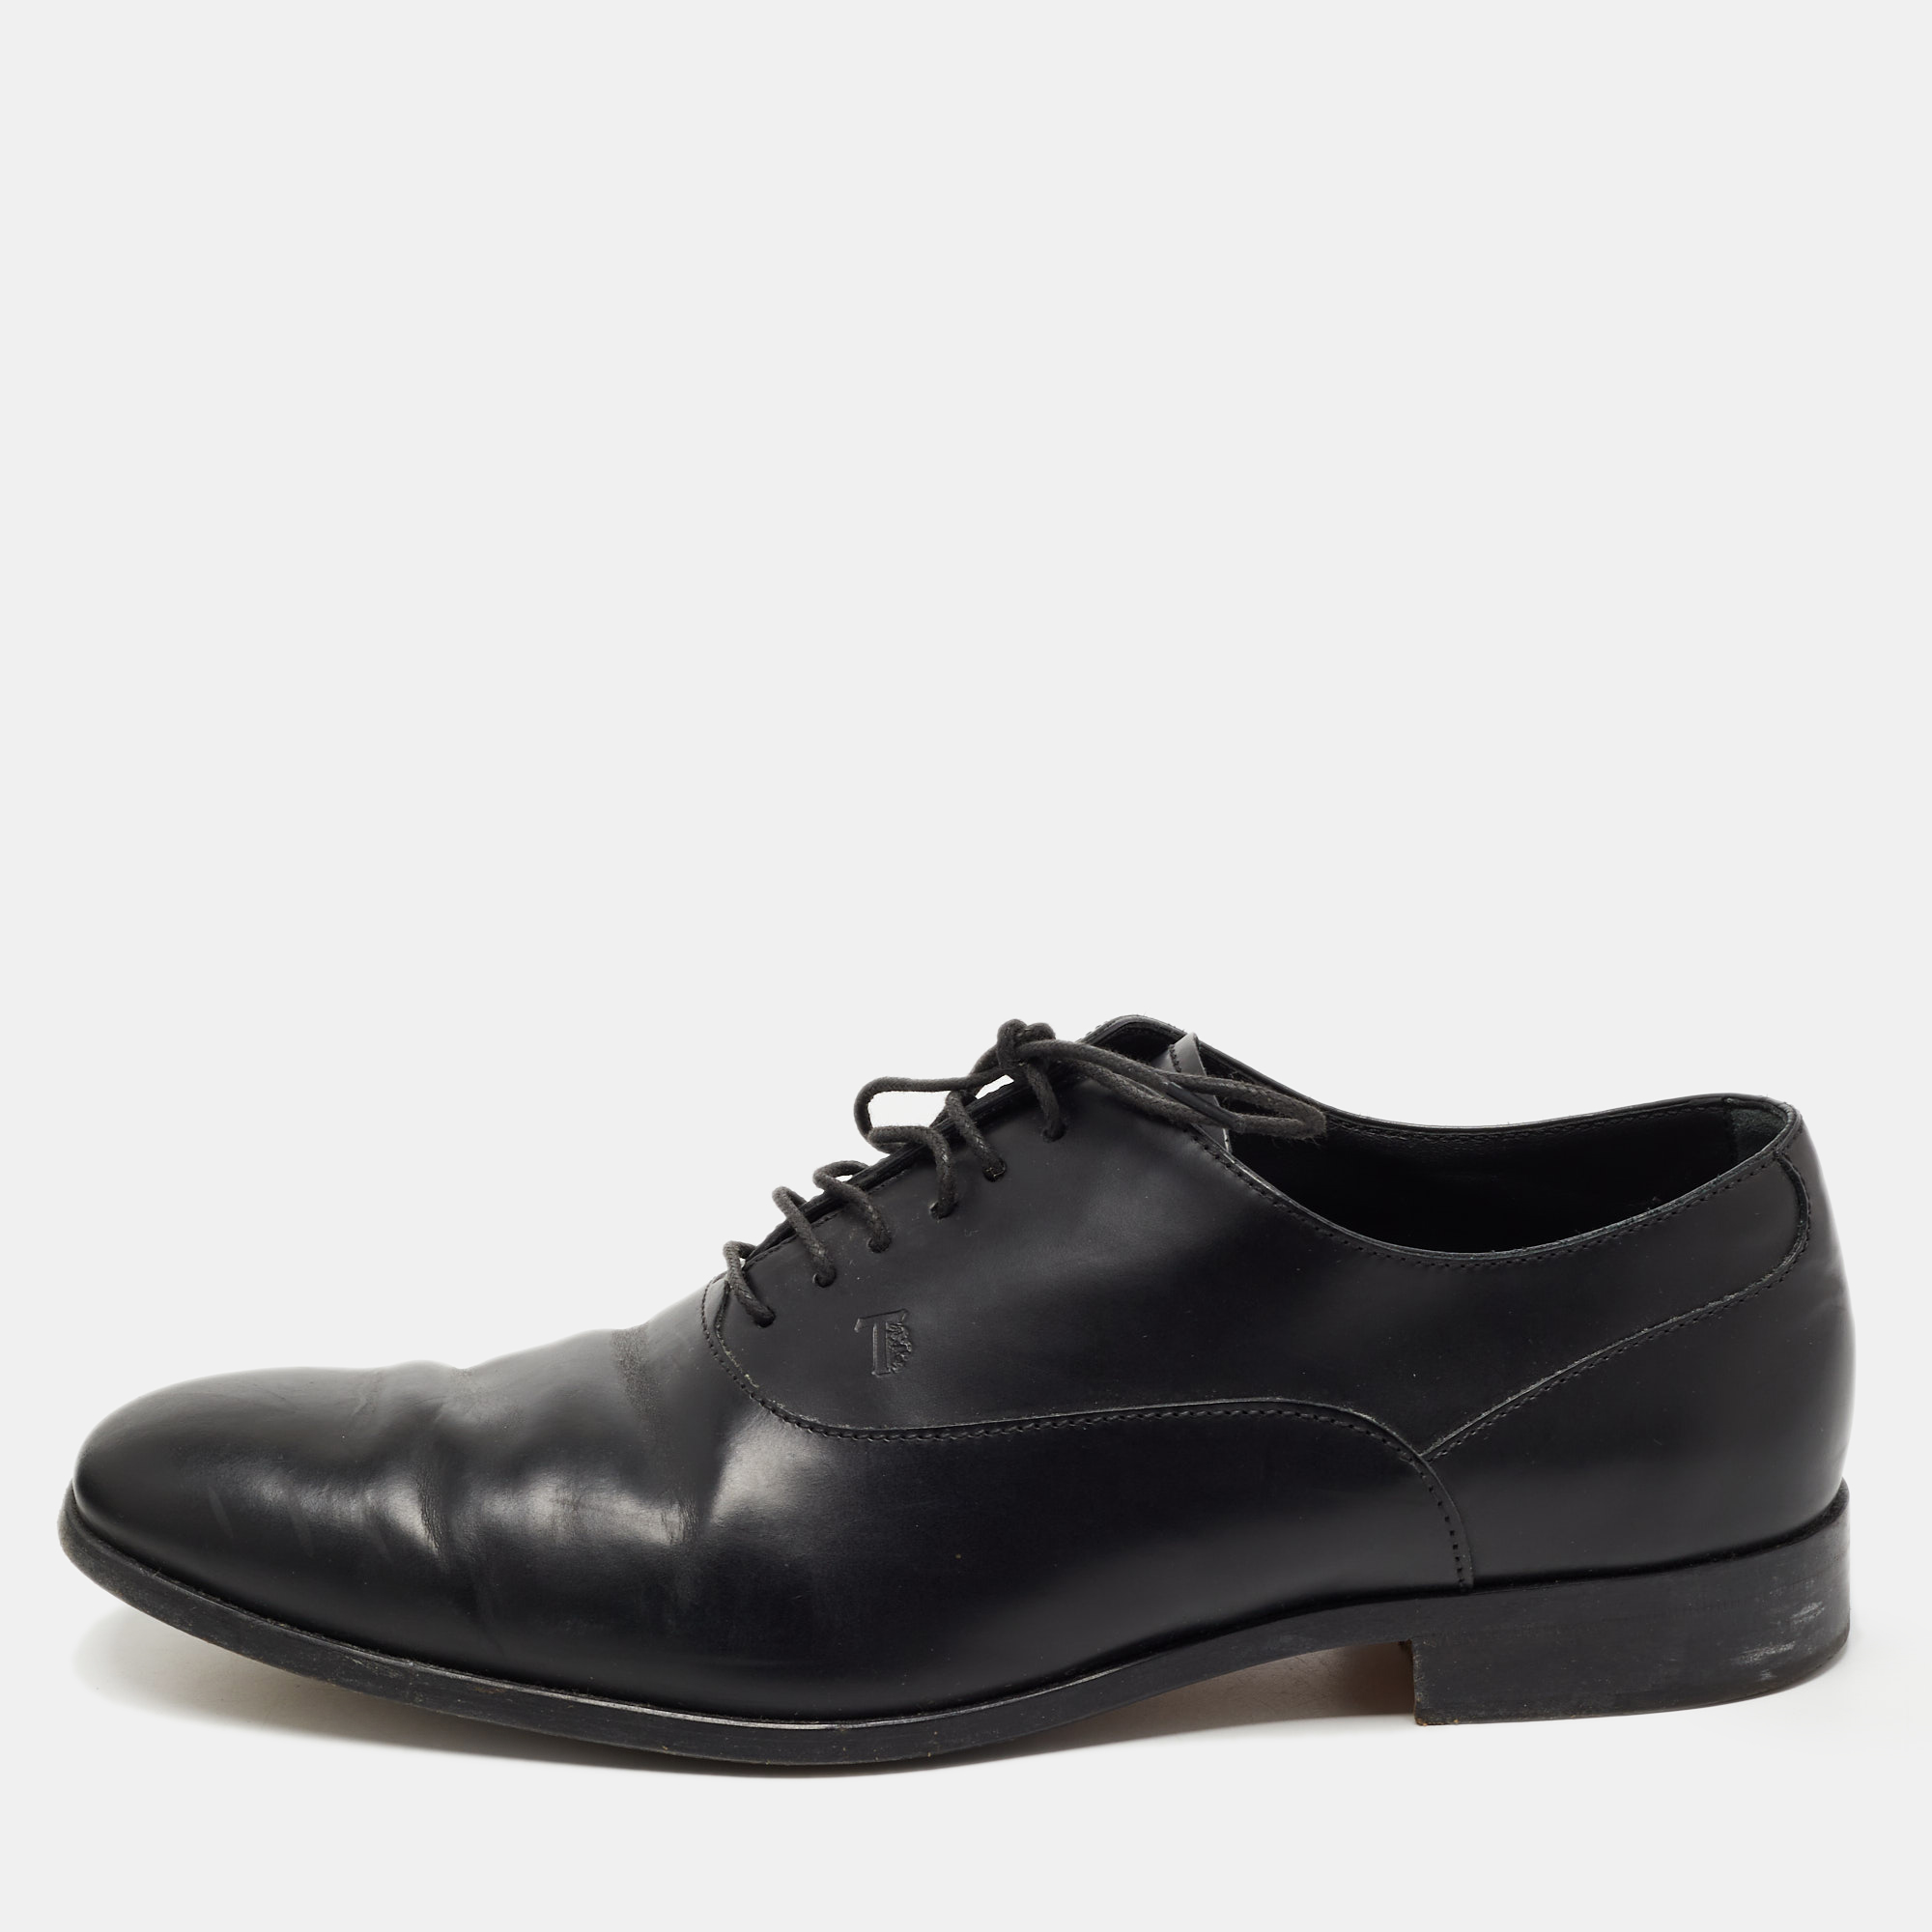 Pre-owned Tod's Black Leather Lace Up Oxfords Size 42